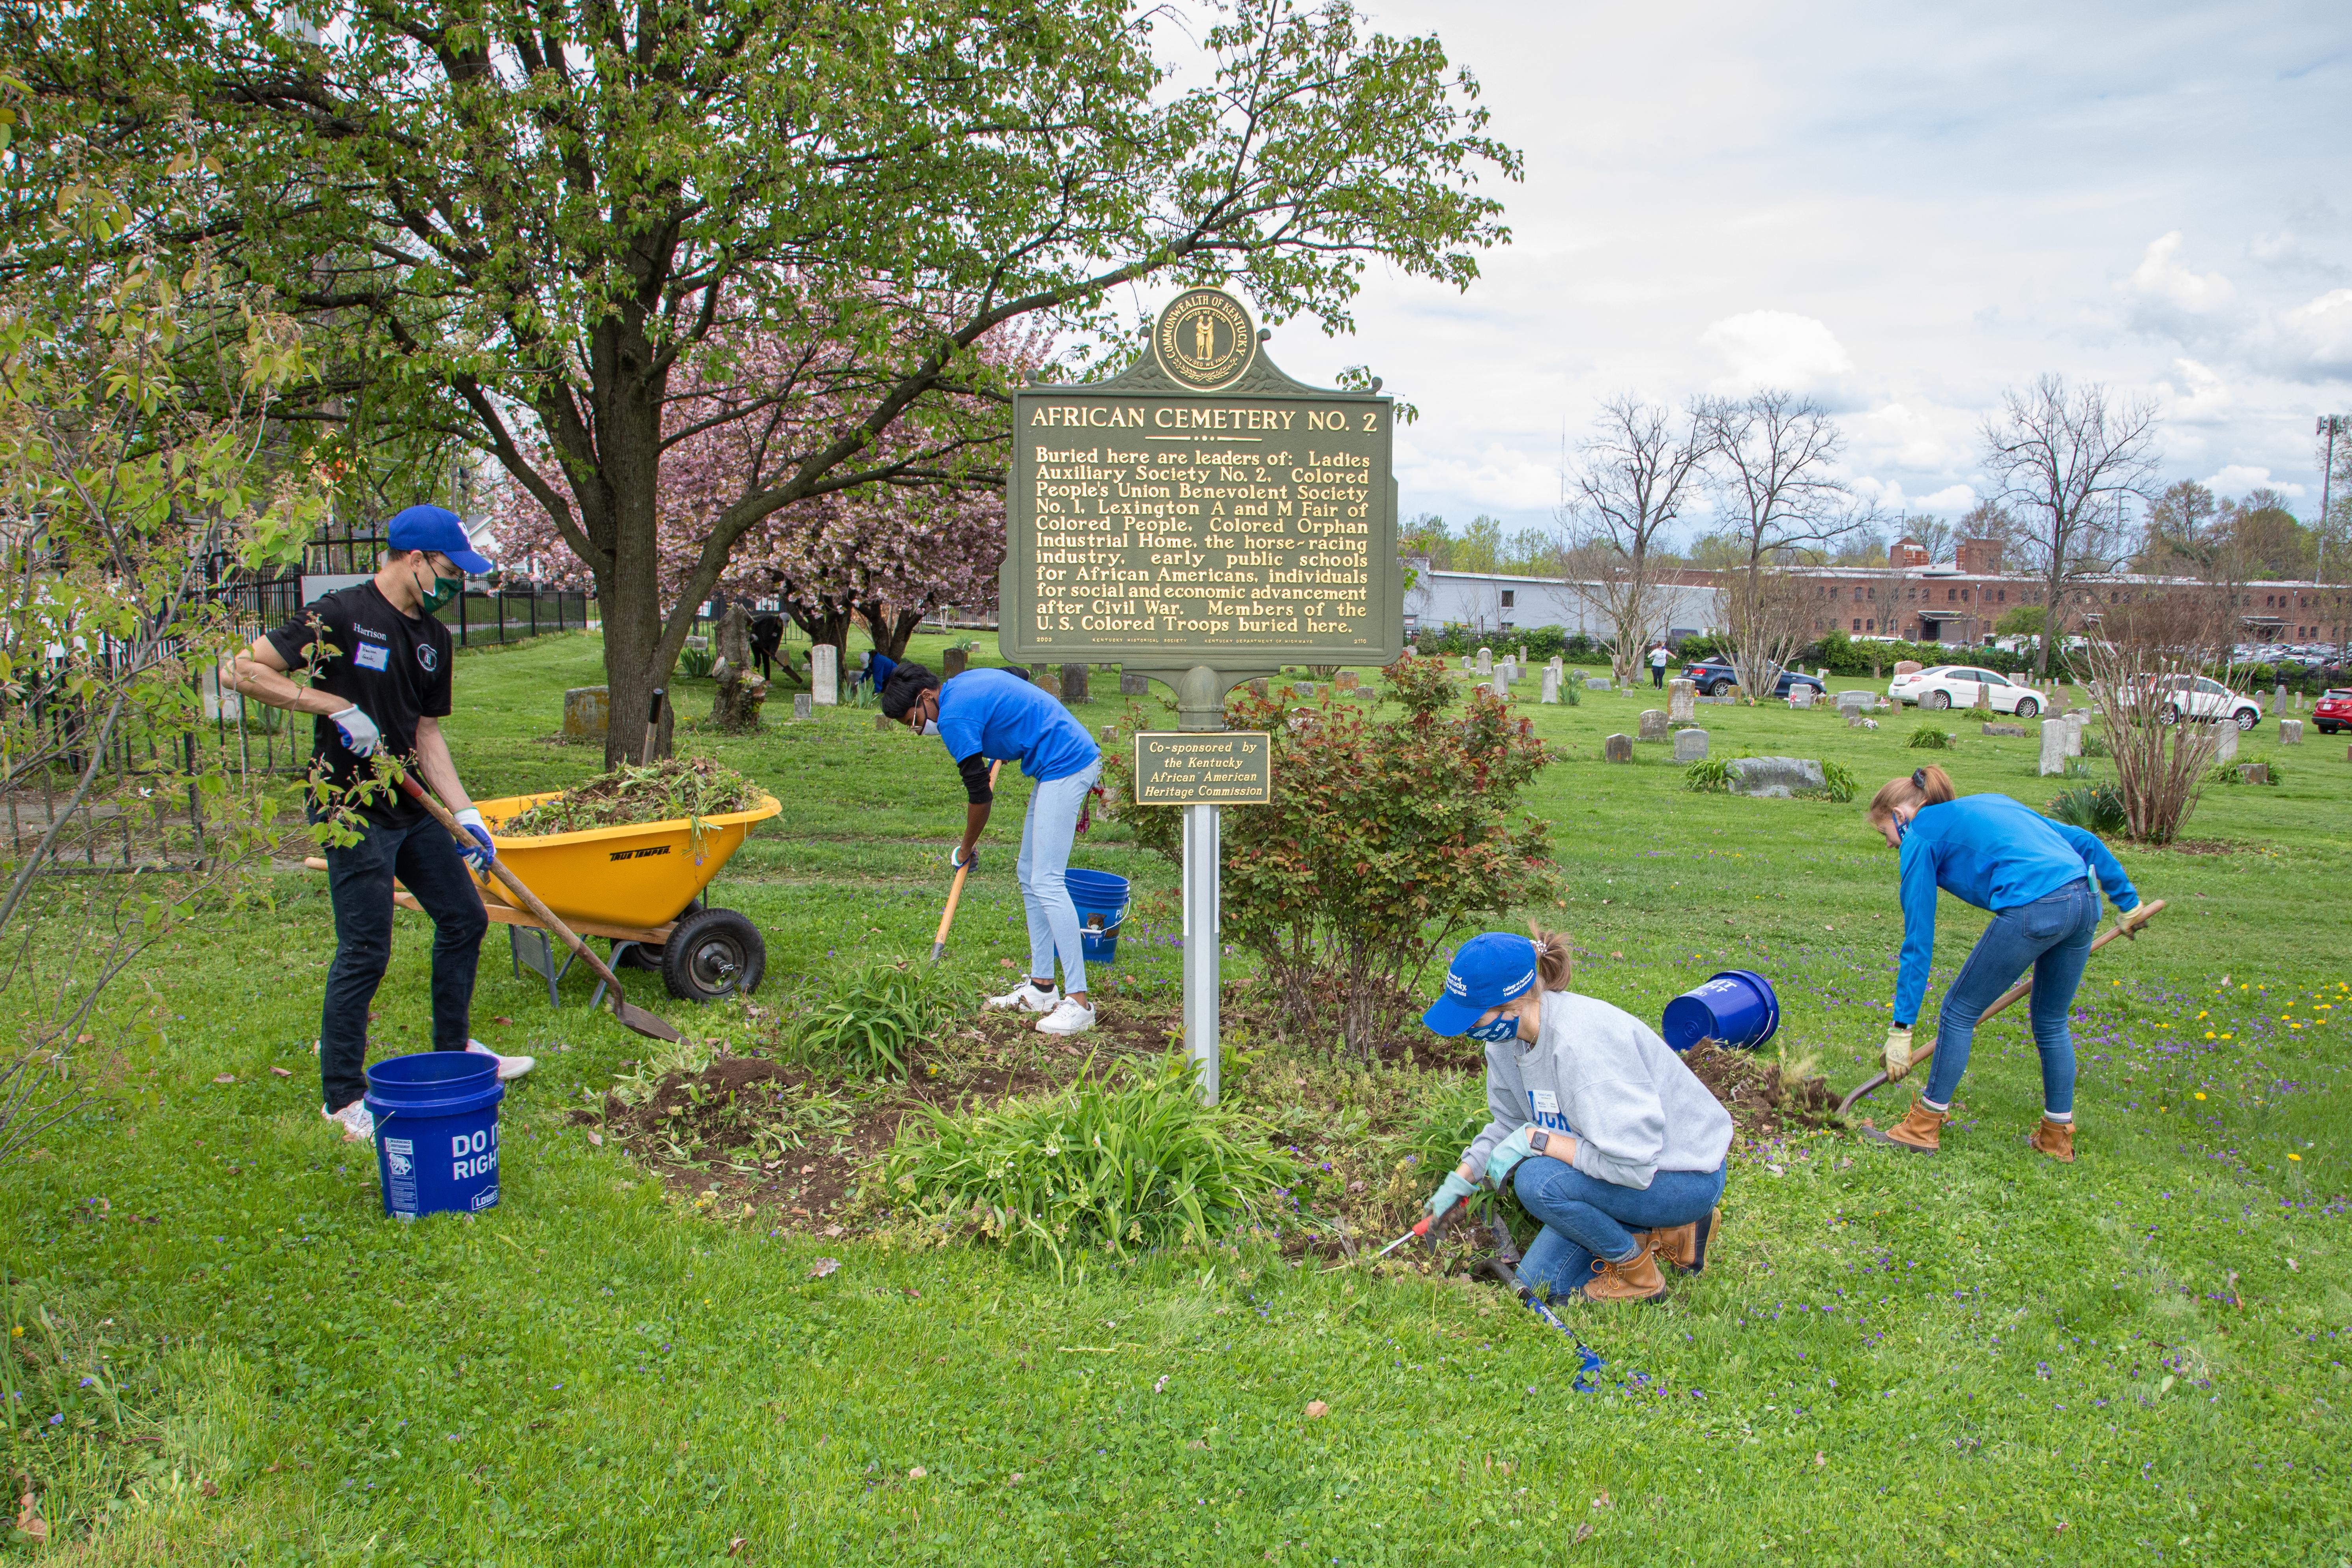 Volunteers at the Spring into Service event spruce up the landscaping at African Cemetery No. 2 in Lexington. Photo by Steve Patton, UK agricultural communications. 